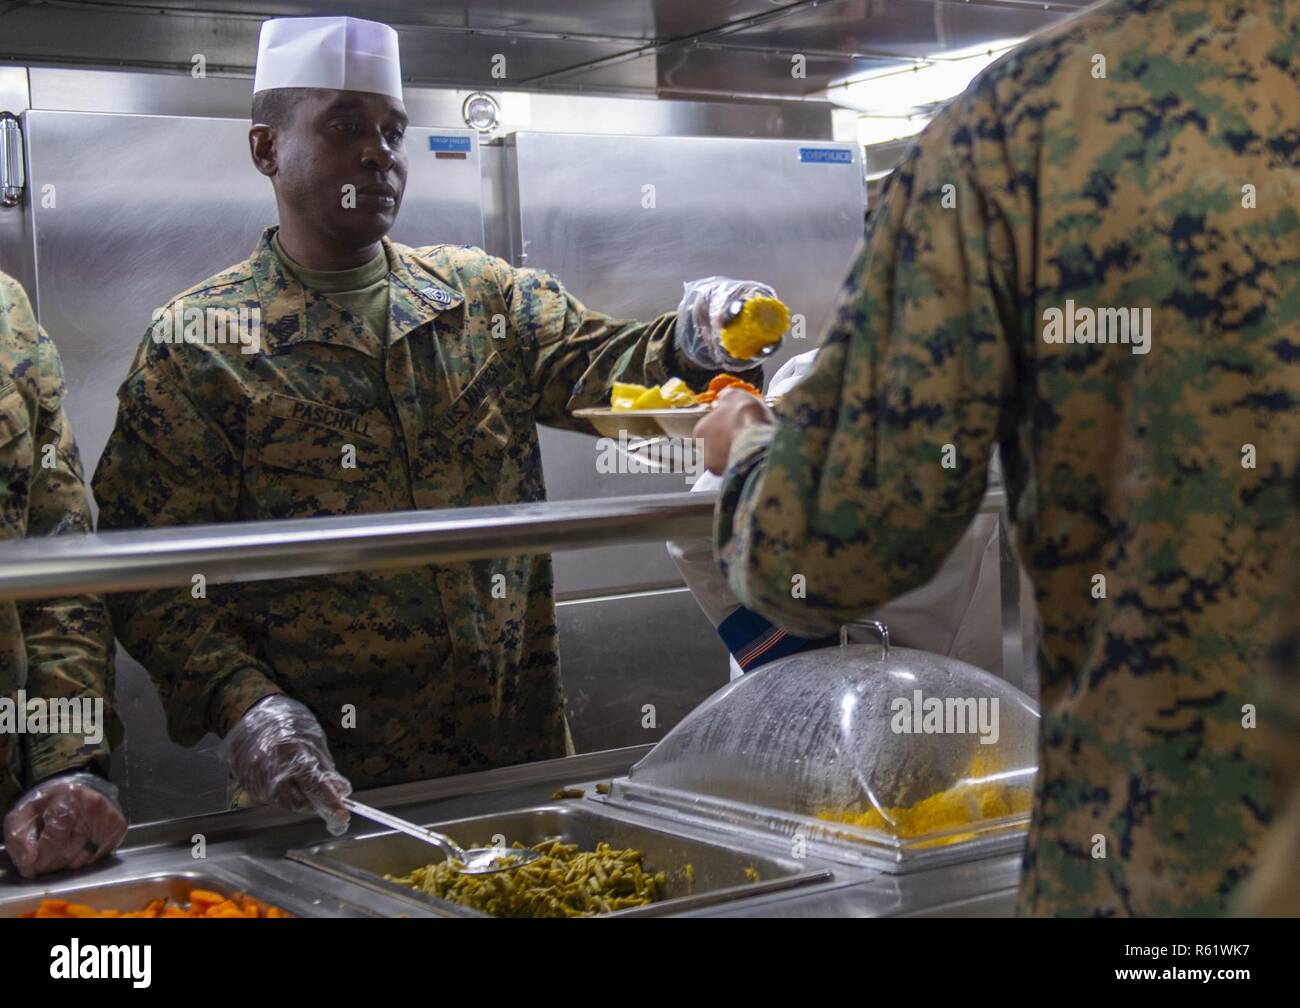 1st Sergeant Yancey Pascall serves corn on the cob to a Marine during the Thanksgiving celebration aboard San Antonio-class amphibious transport dock ship USS Somerset (LPD 25) Nov. 21, 2018, while underway in the Pacific Ocean. USS Somerset is part of Littoral Combat Group One, which is deployed in support of the Enduring Promise Initiative to reaffirm U.S. Southern Command’s longstanding commitment to the nations of the Western Hemisphere. Stock Photo